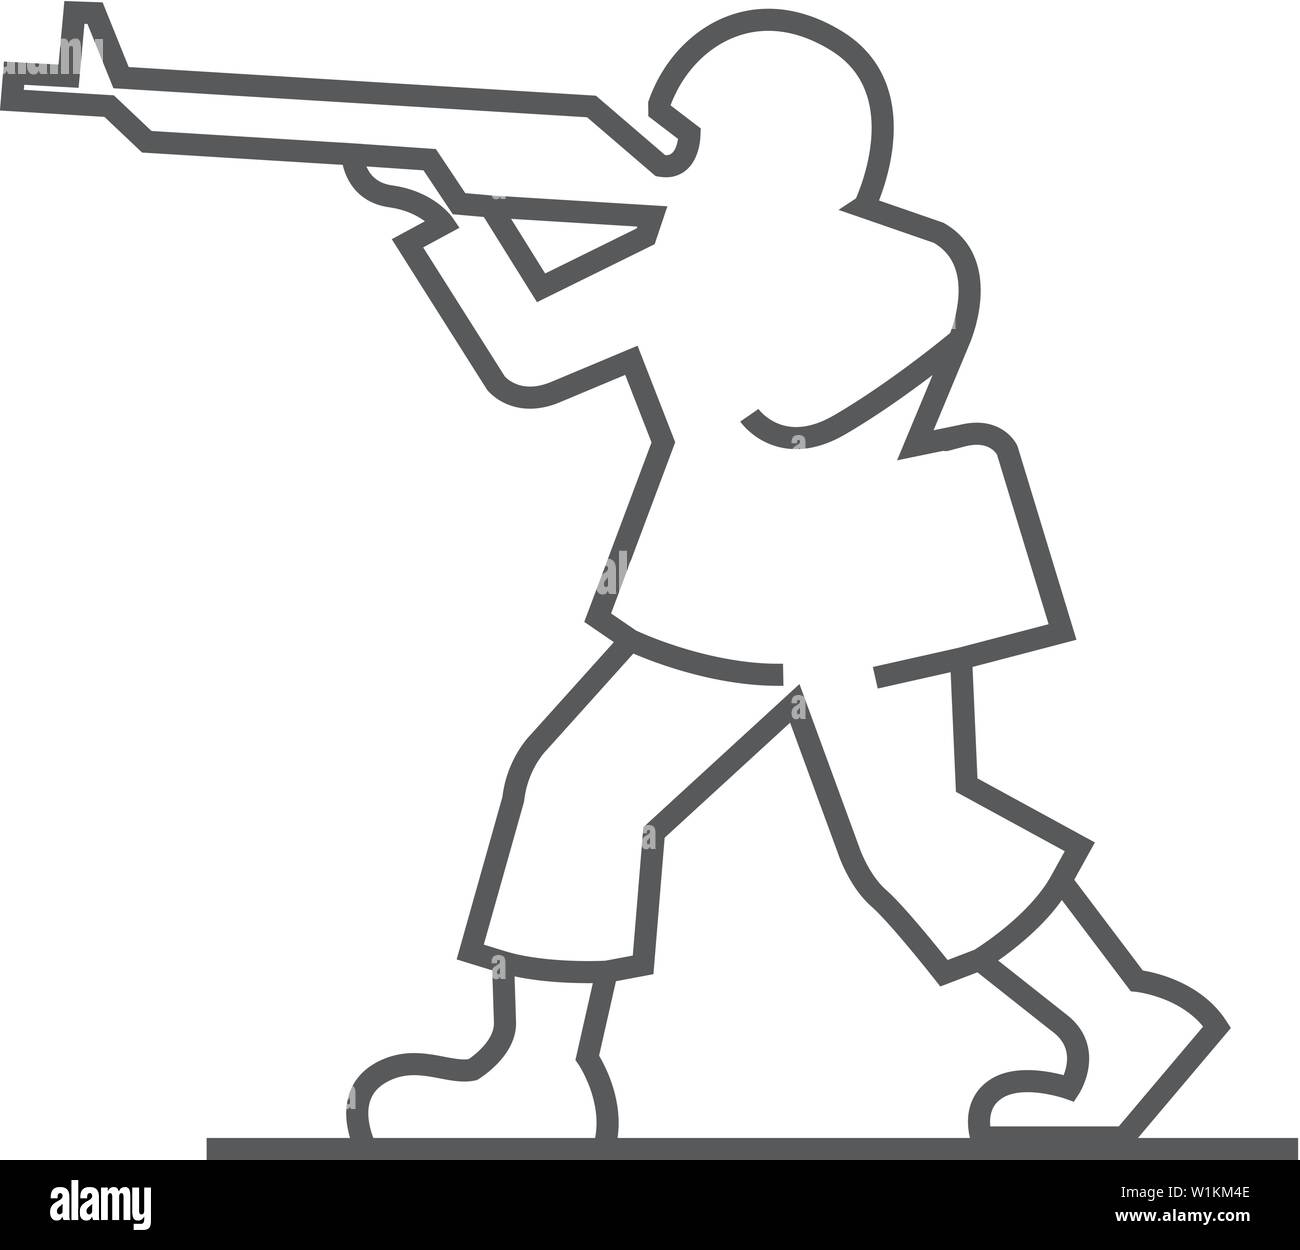 How to Draw a Soldier - Really Easy Drawing Tutorial